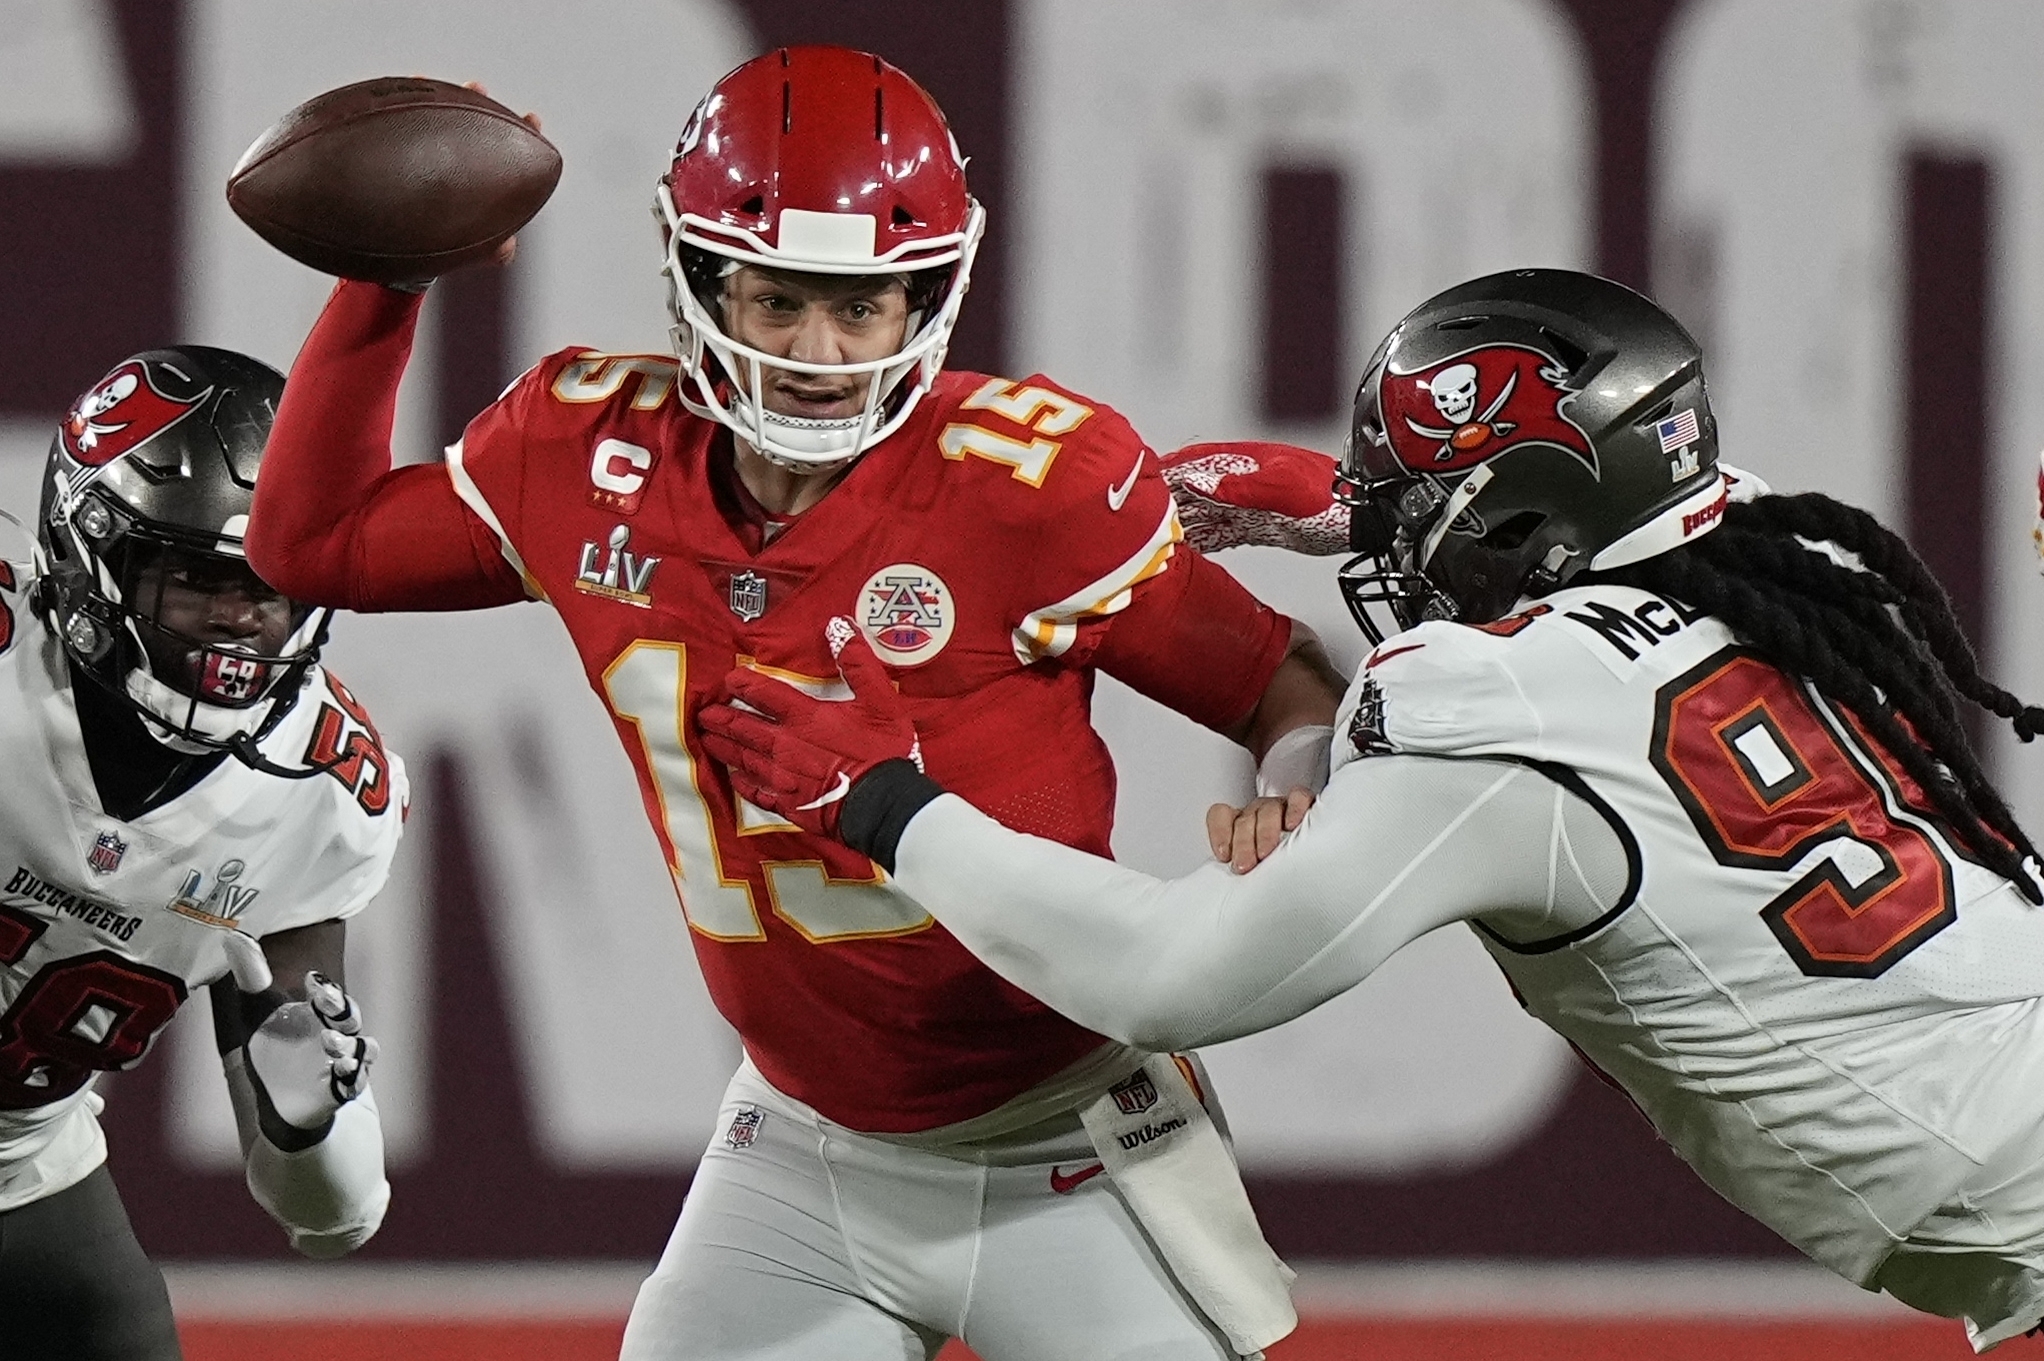 Chiefs' Patrick Mahomes Speaks Out After Rough 31-9 Loss in Super Bowl LV